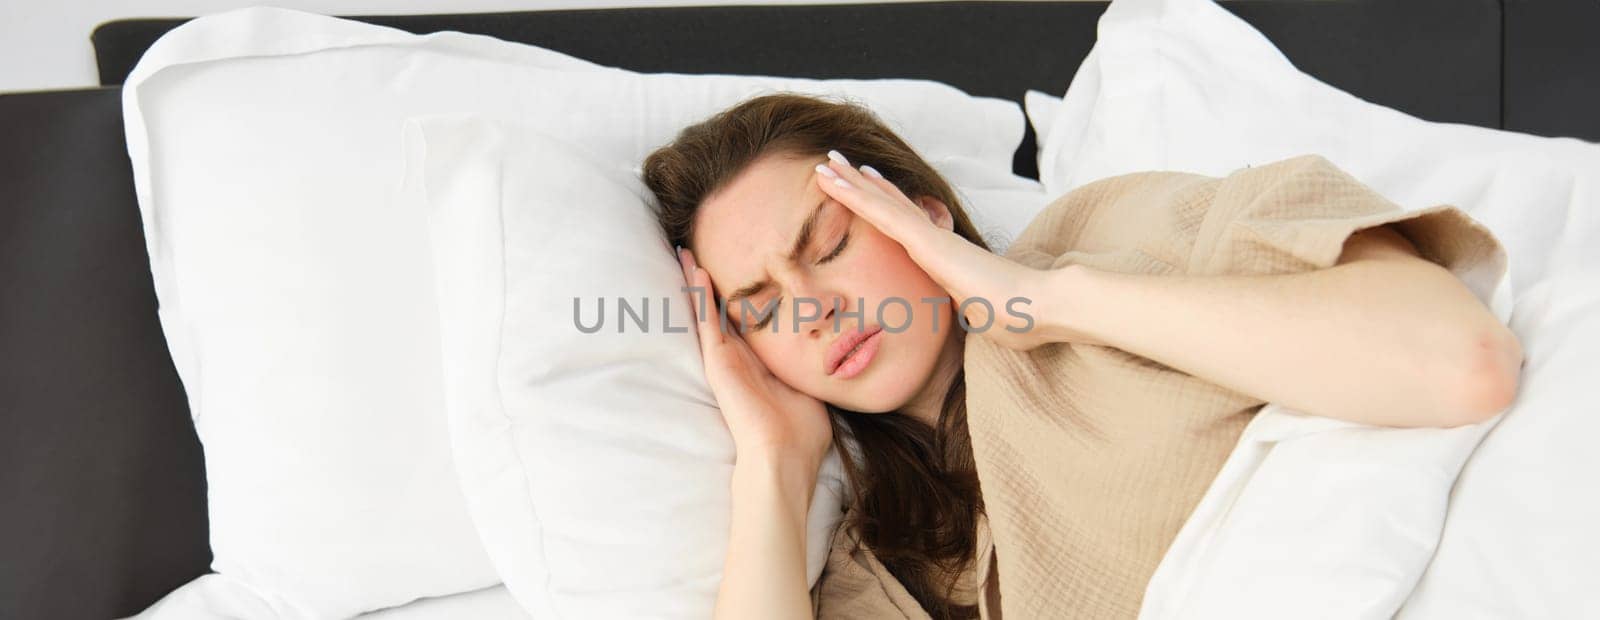 Woman lying in bed and feeling unwell, having headache, touching her head with frustrated face, has high fever or migraine. concept of health and people.